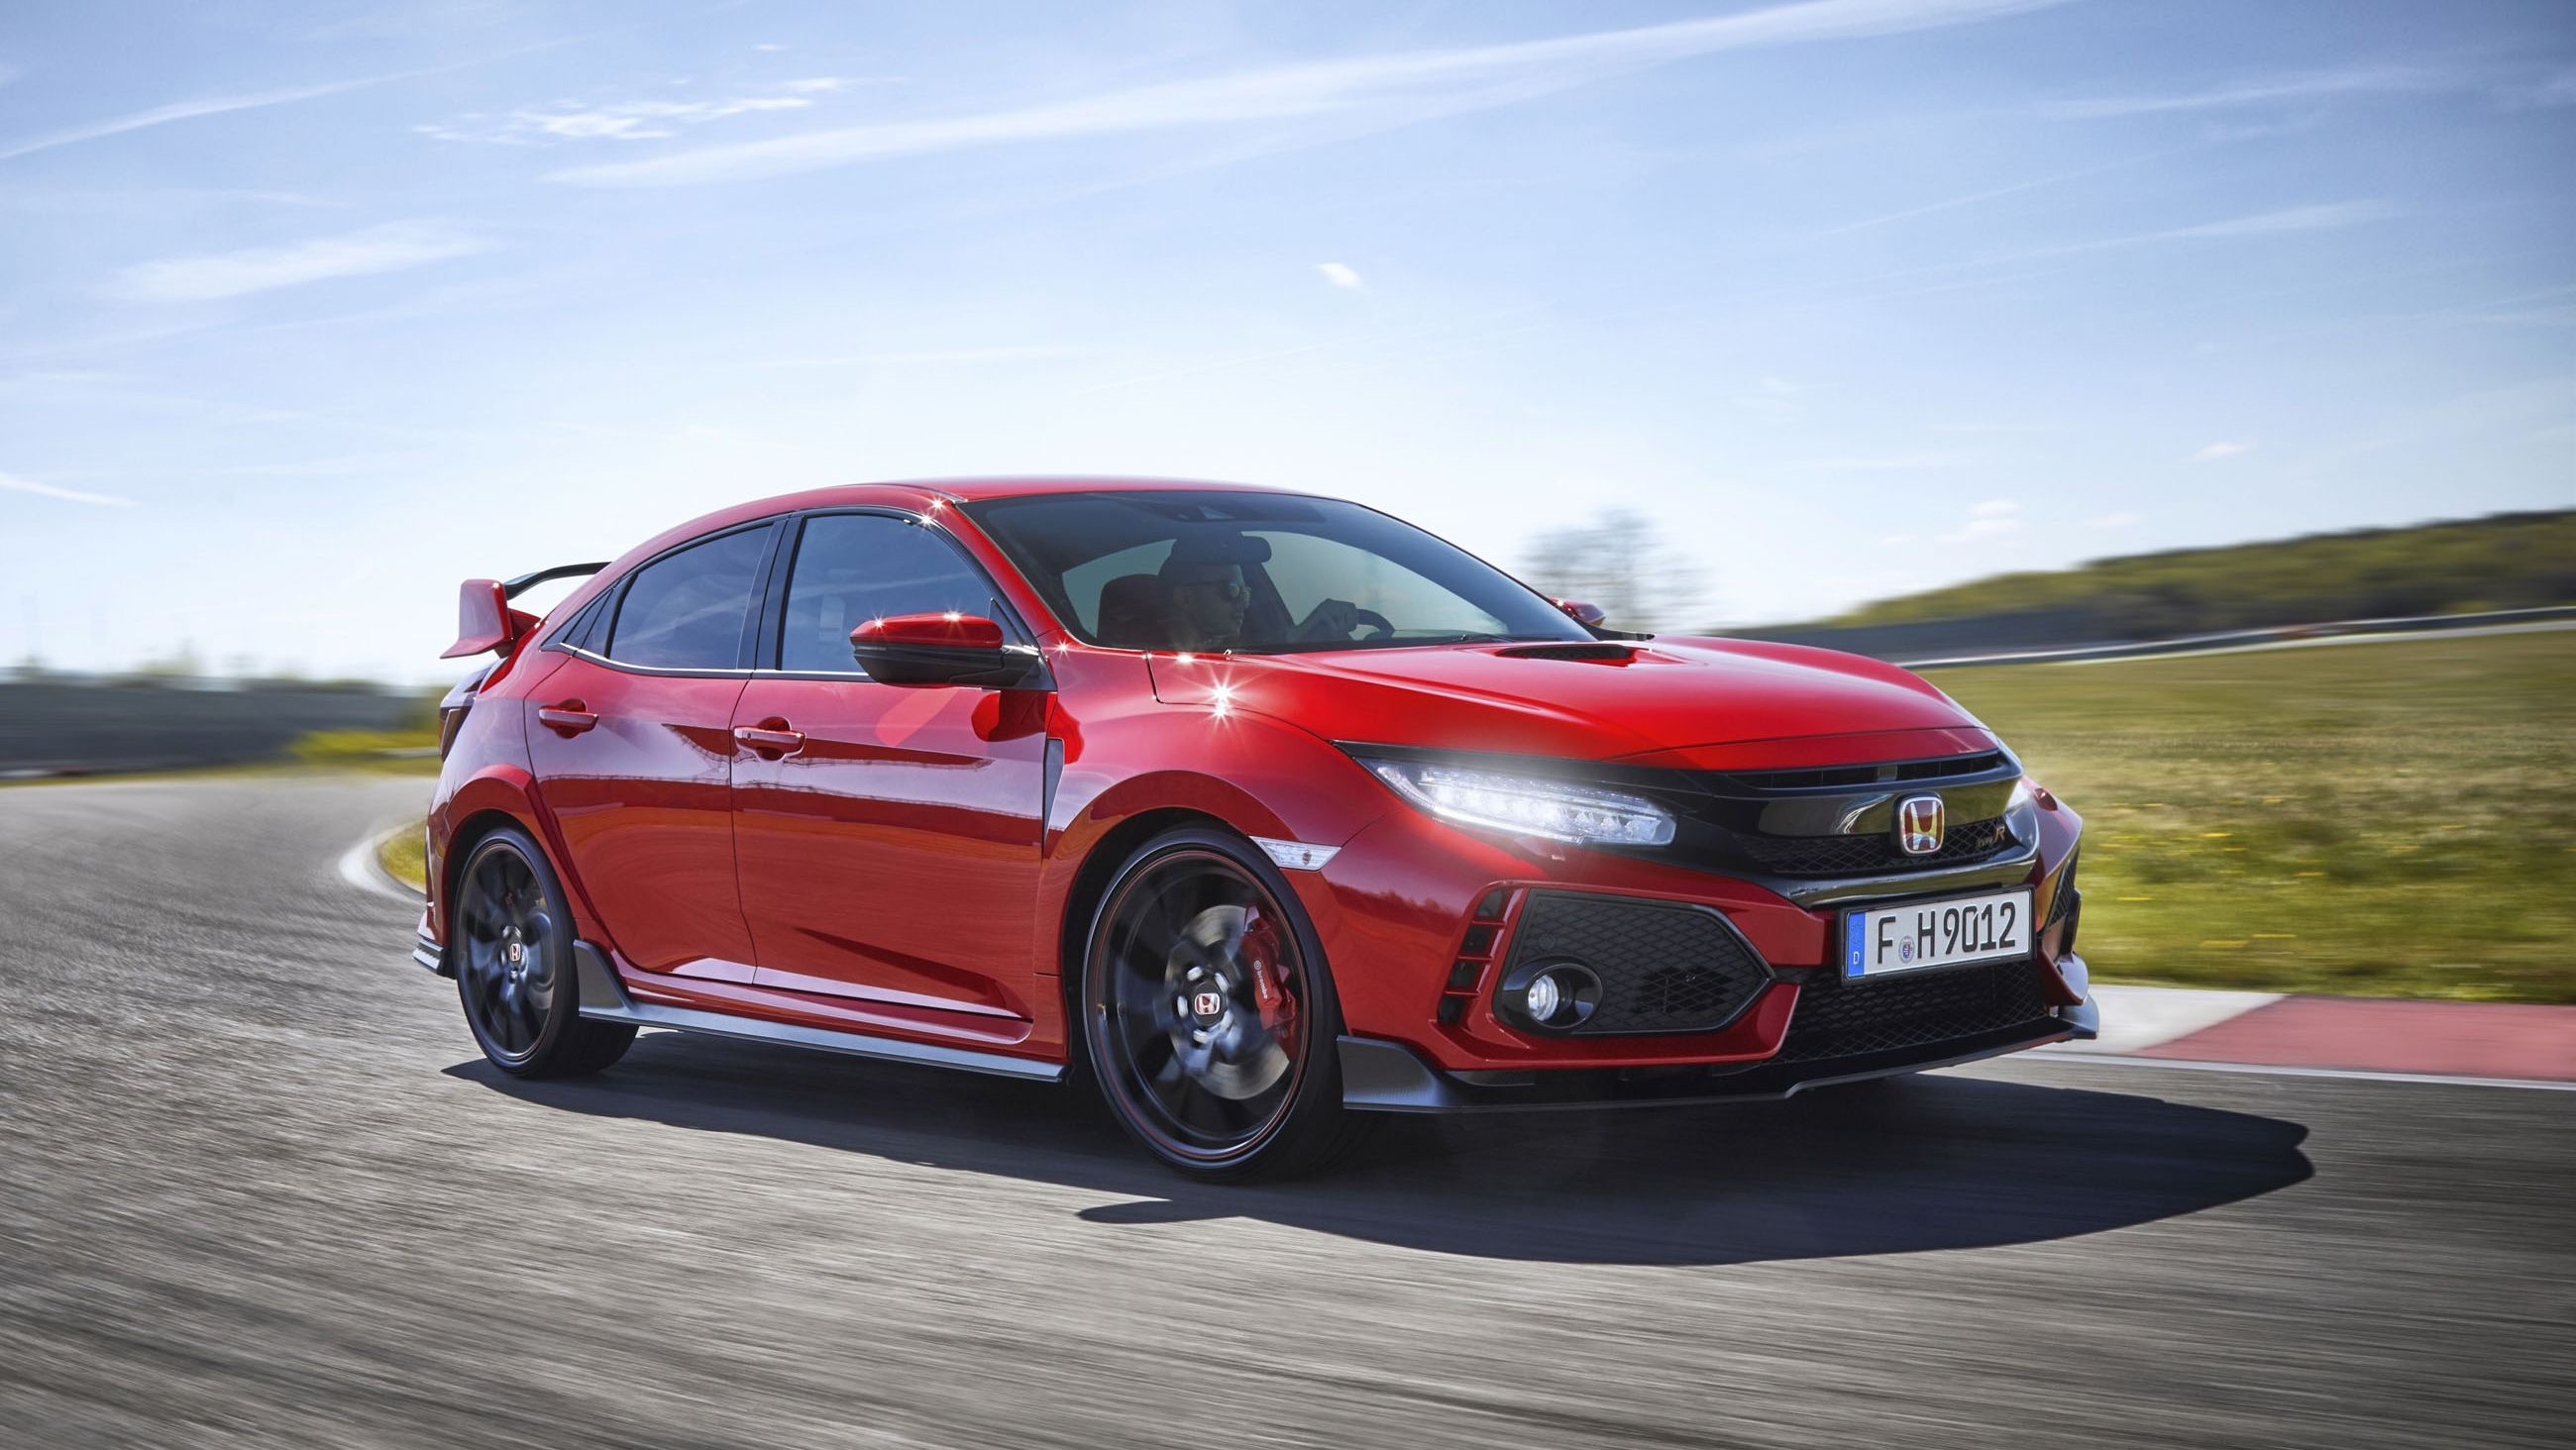 2020 James May Just Did the Best Video Review of the Honda Civic Type R That We've Ever Seen